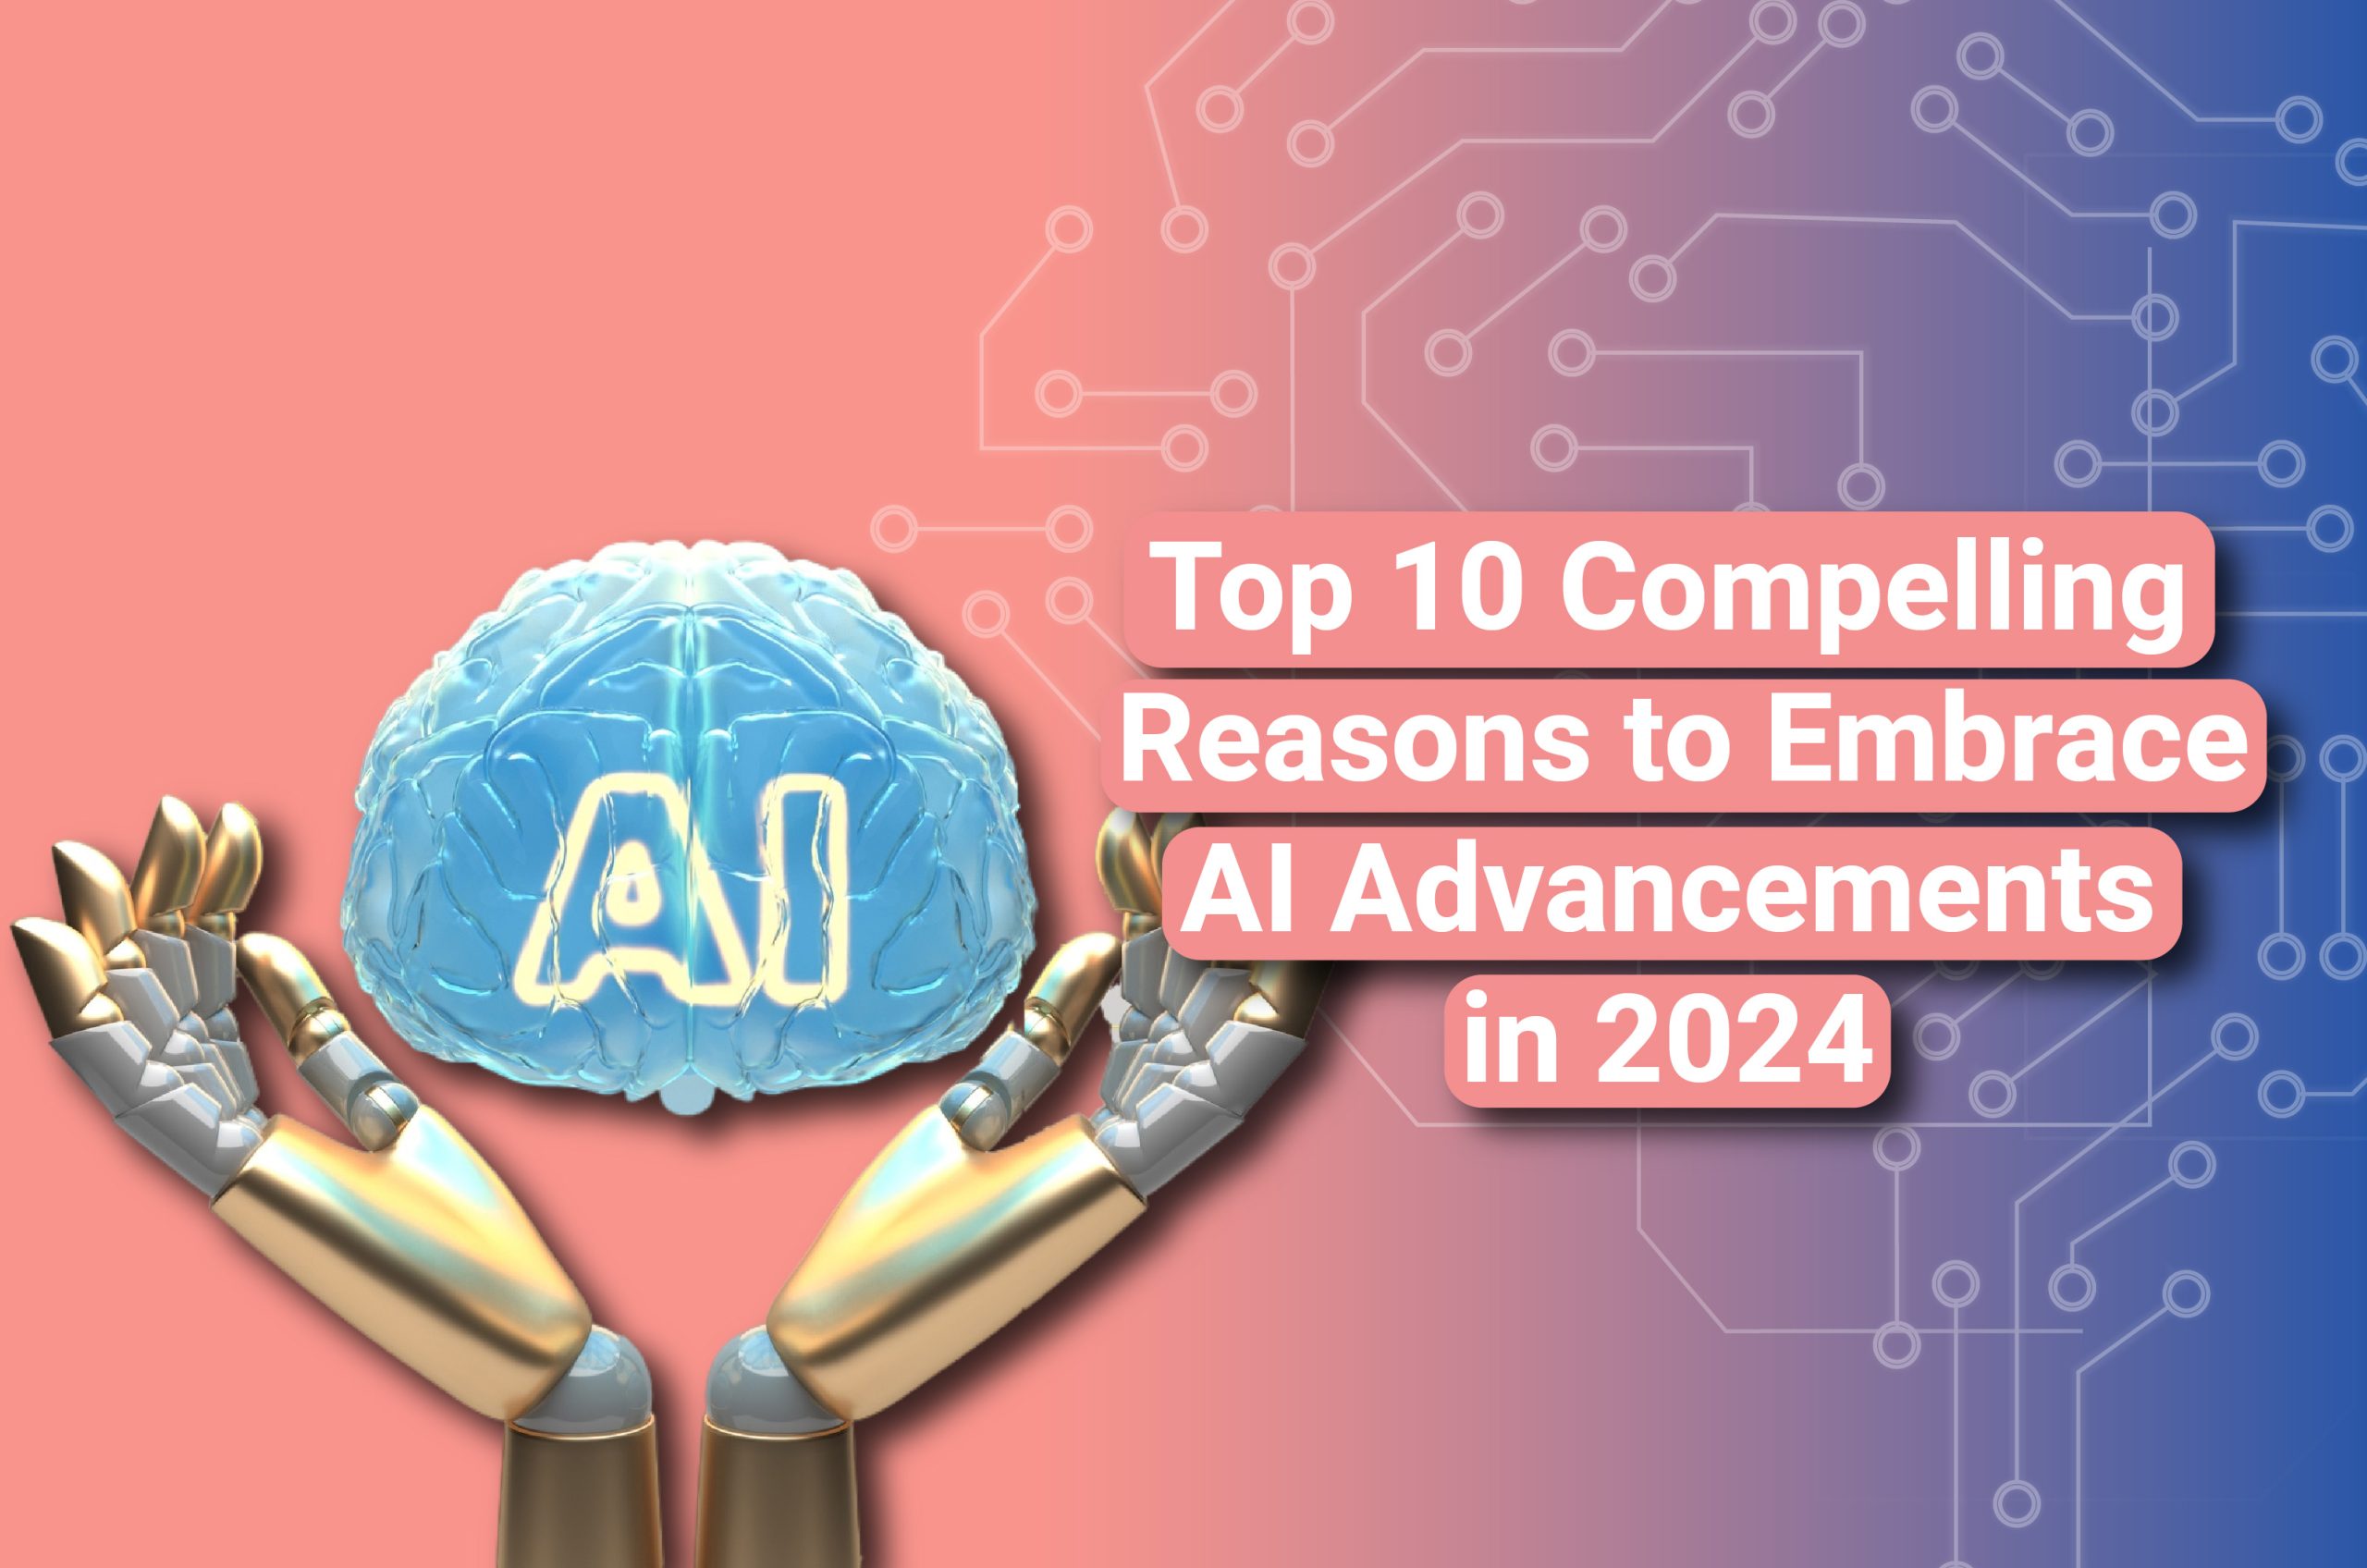 Top 10 Compelling Reasons to Embrace AI Advancements in 2024